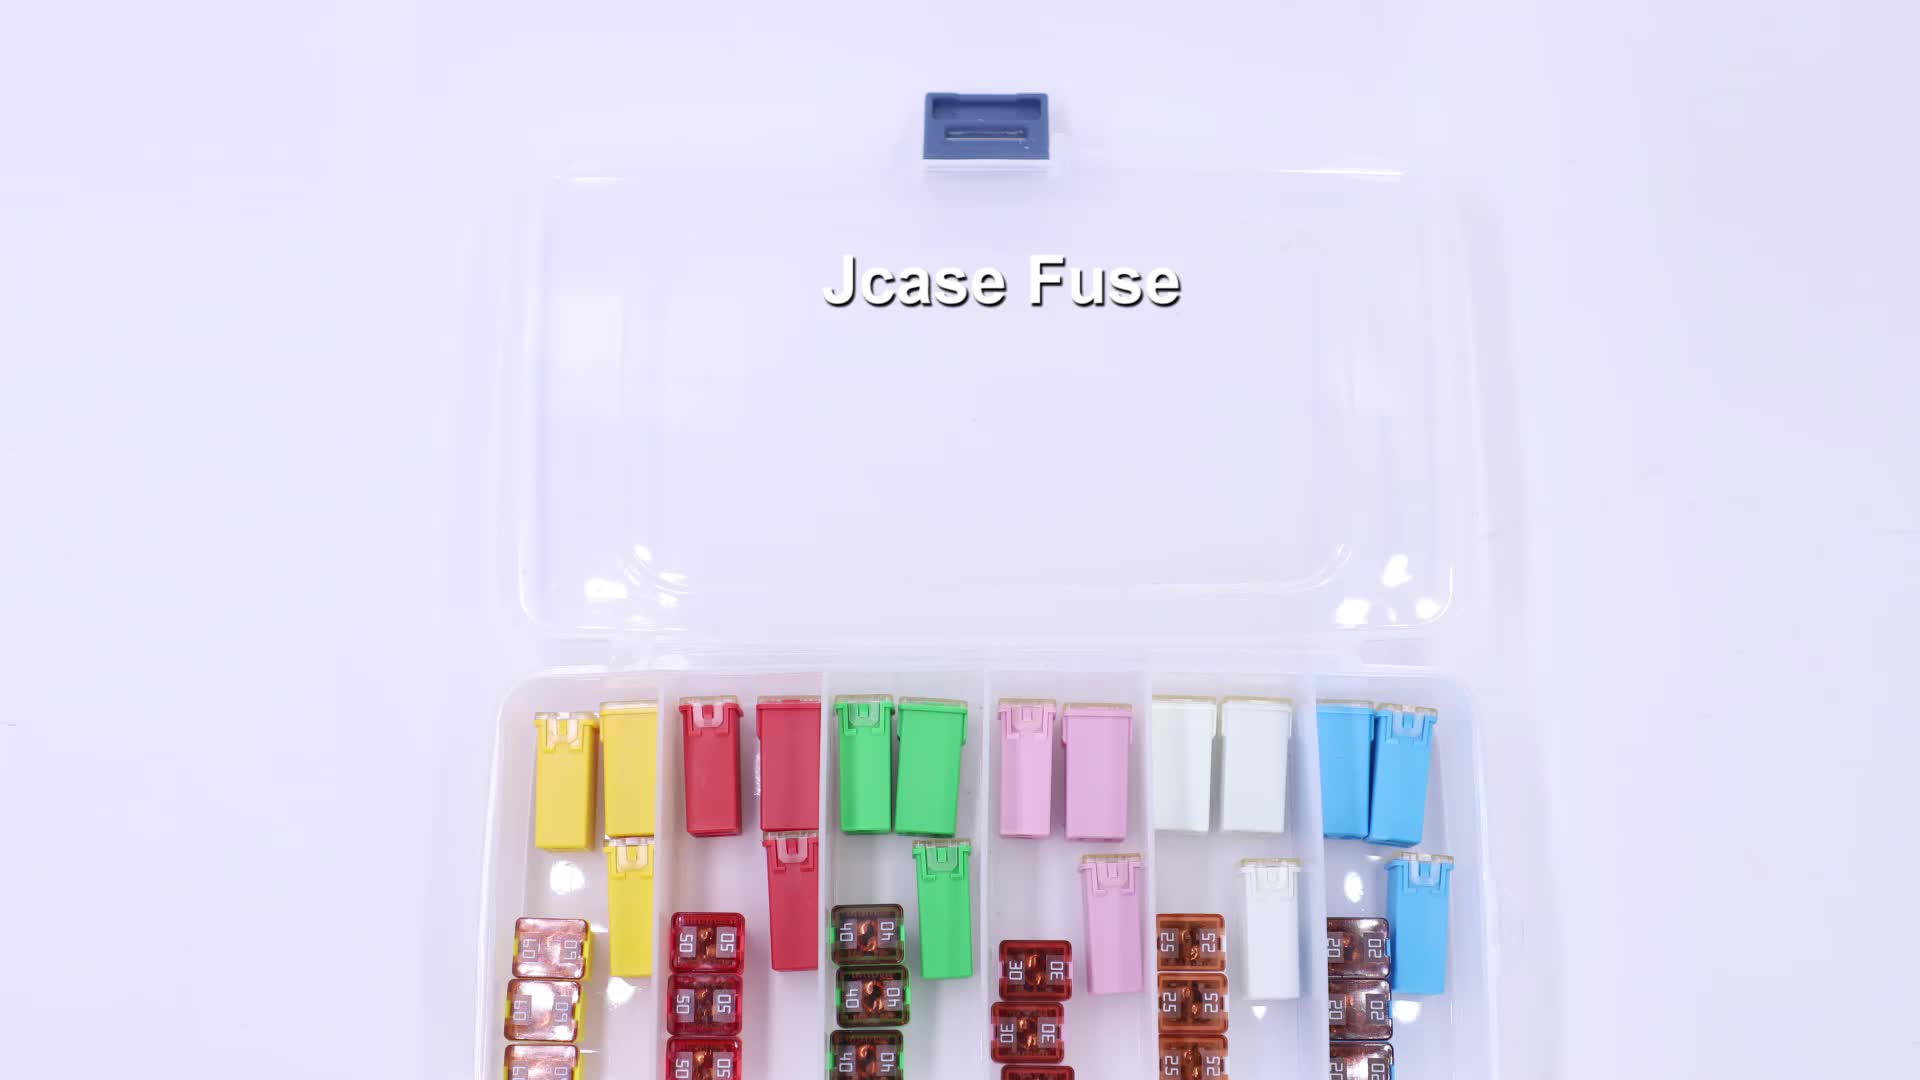 Fuse Maxi Fuse Fual Fusion สำหรับ Ford Chevy/GM และ Toyota Pickup Trucks Cars SUVS1